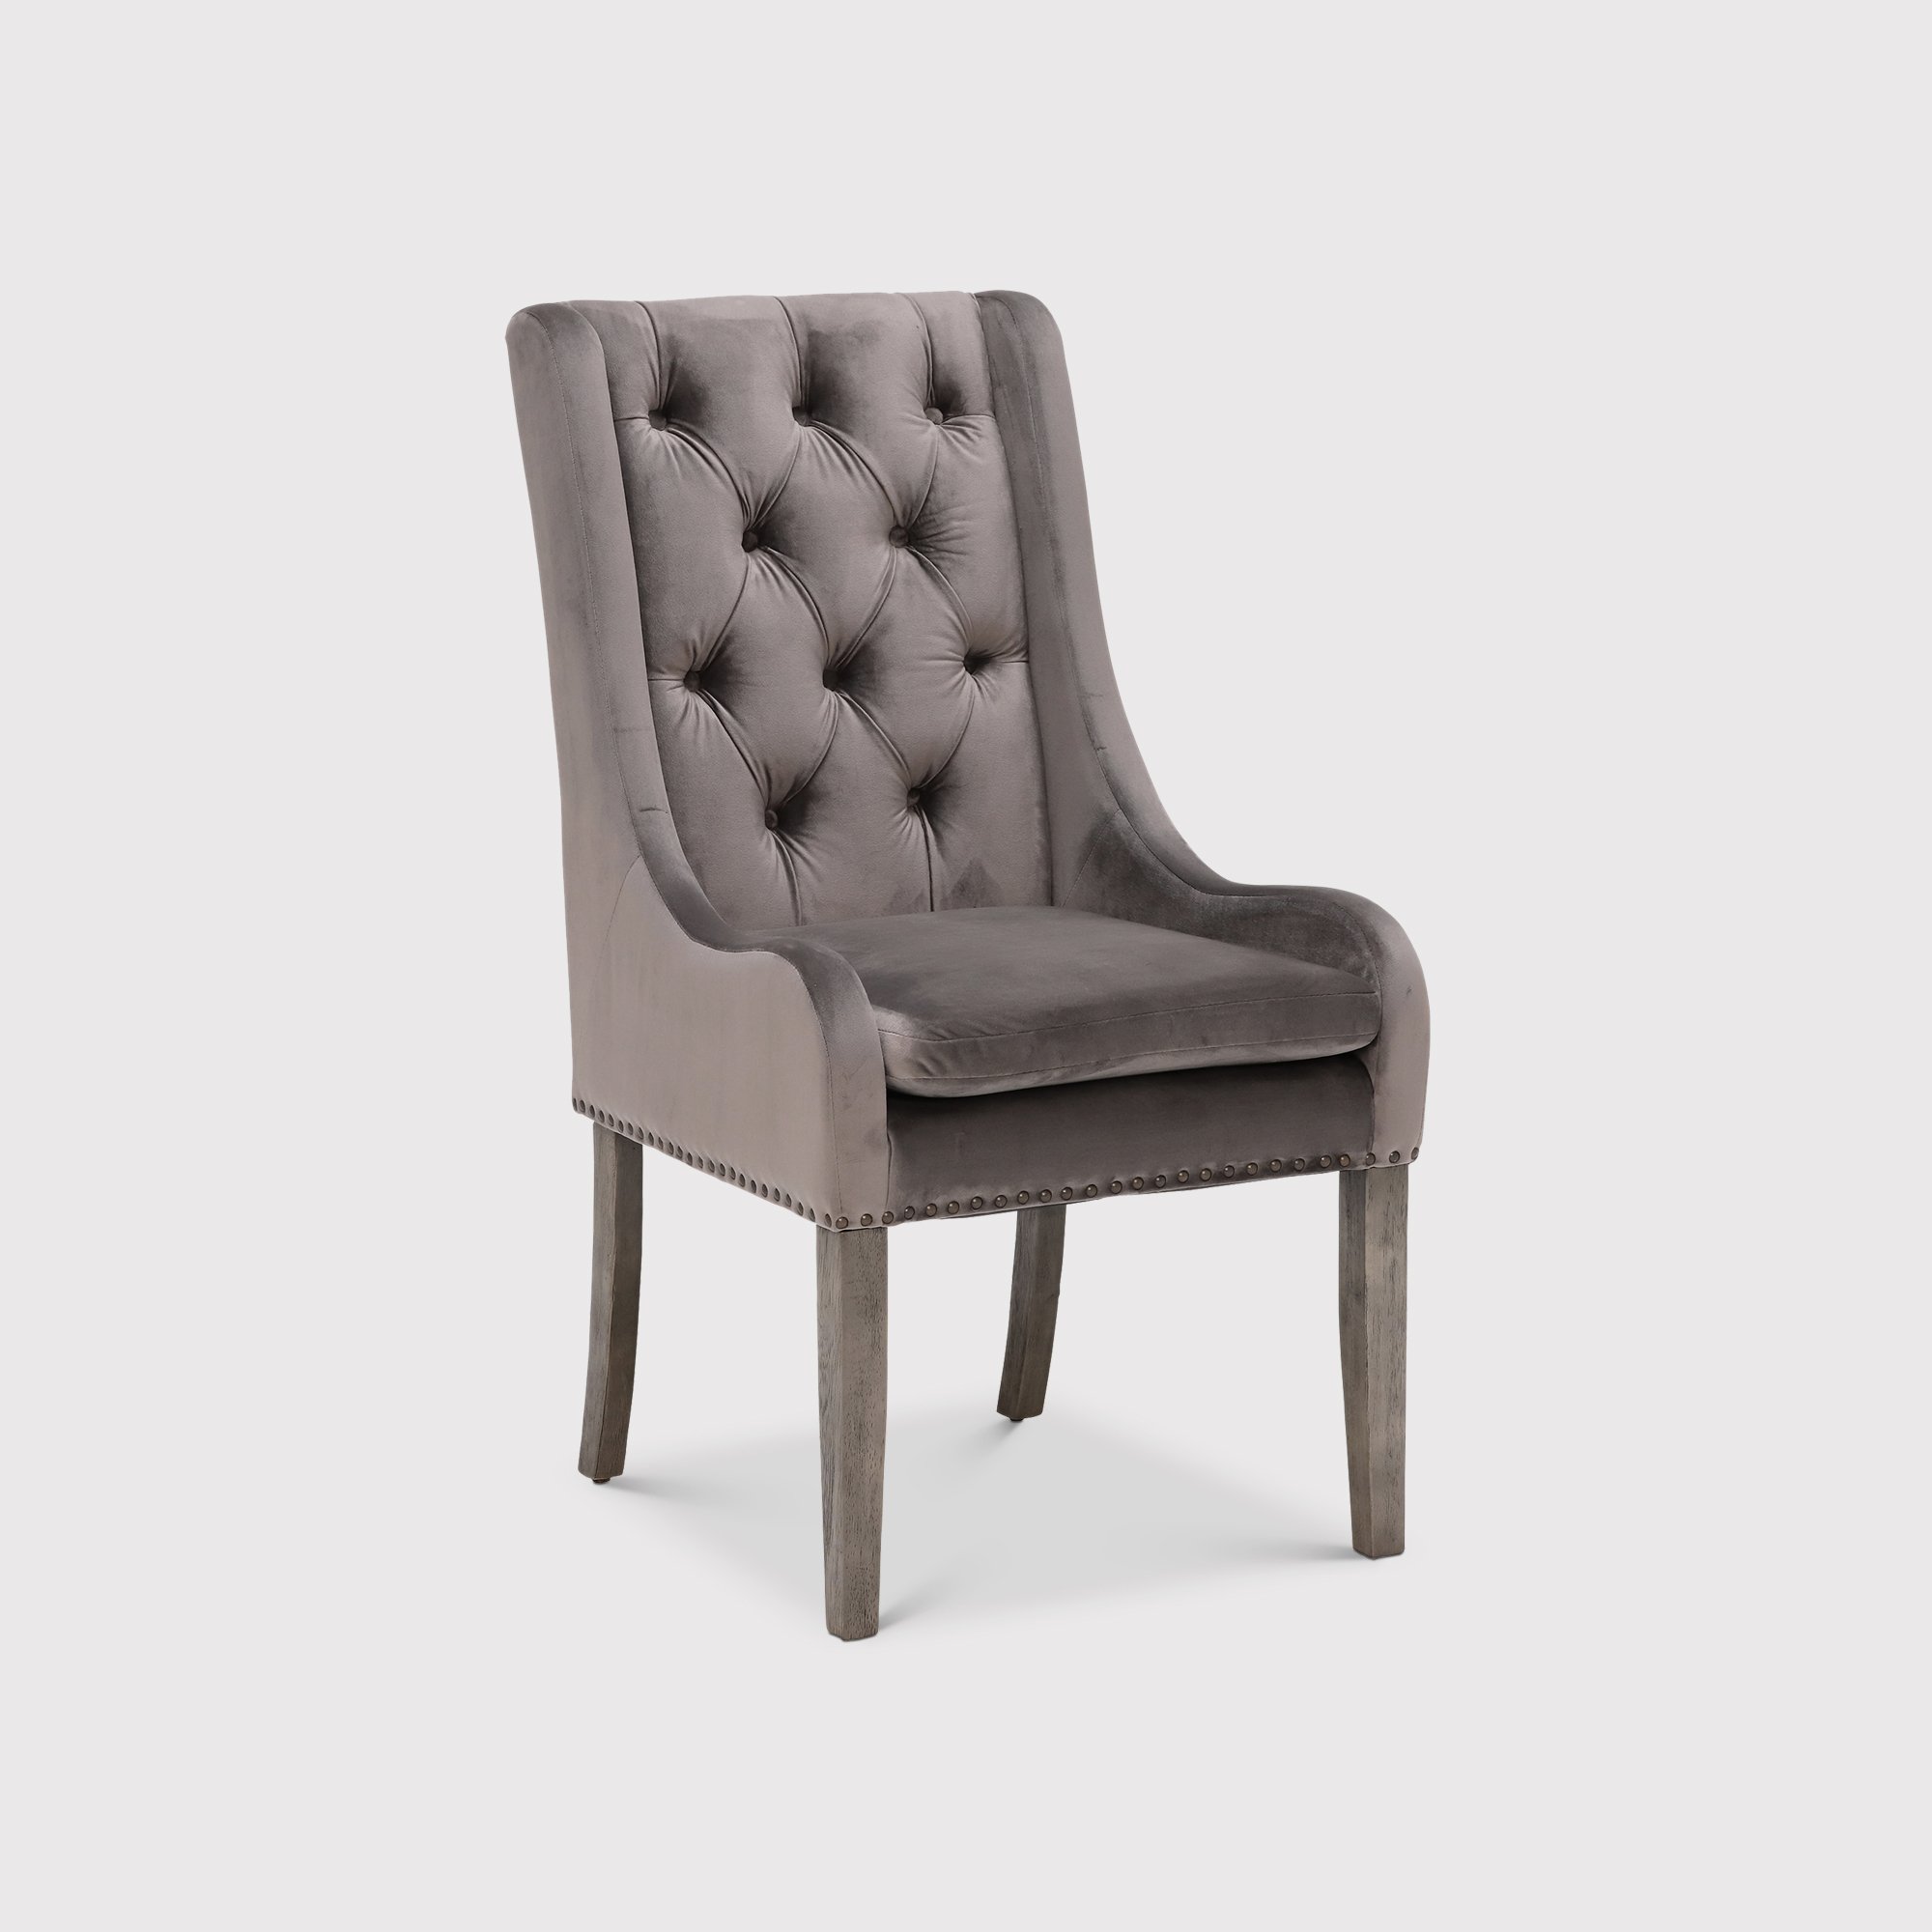 Ophelia Buttoned Back Dining Chair, Grey Velvet | Barker & Stonehouse